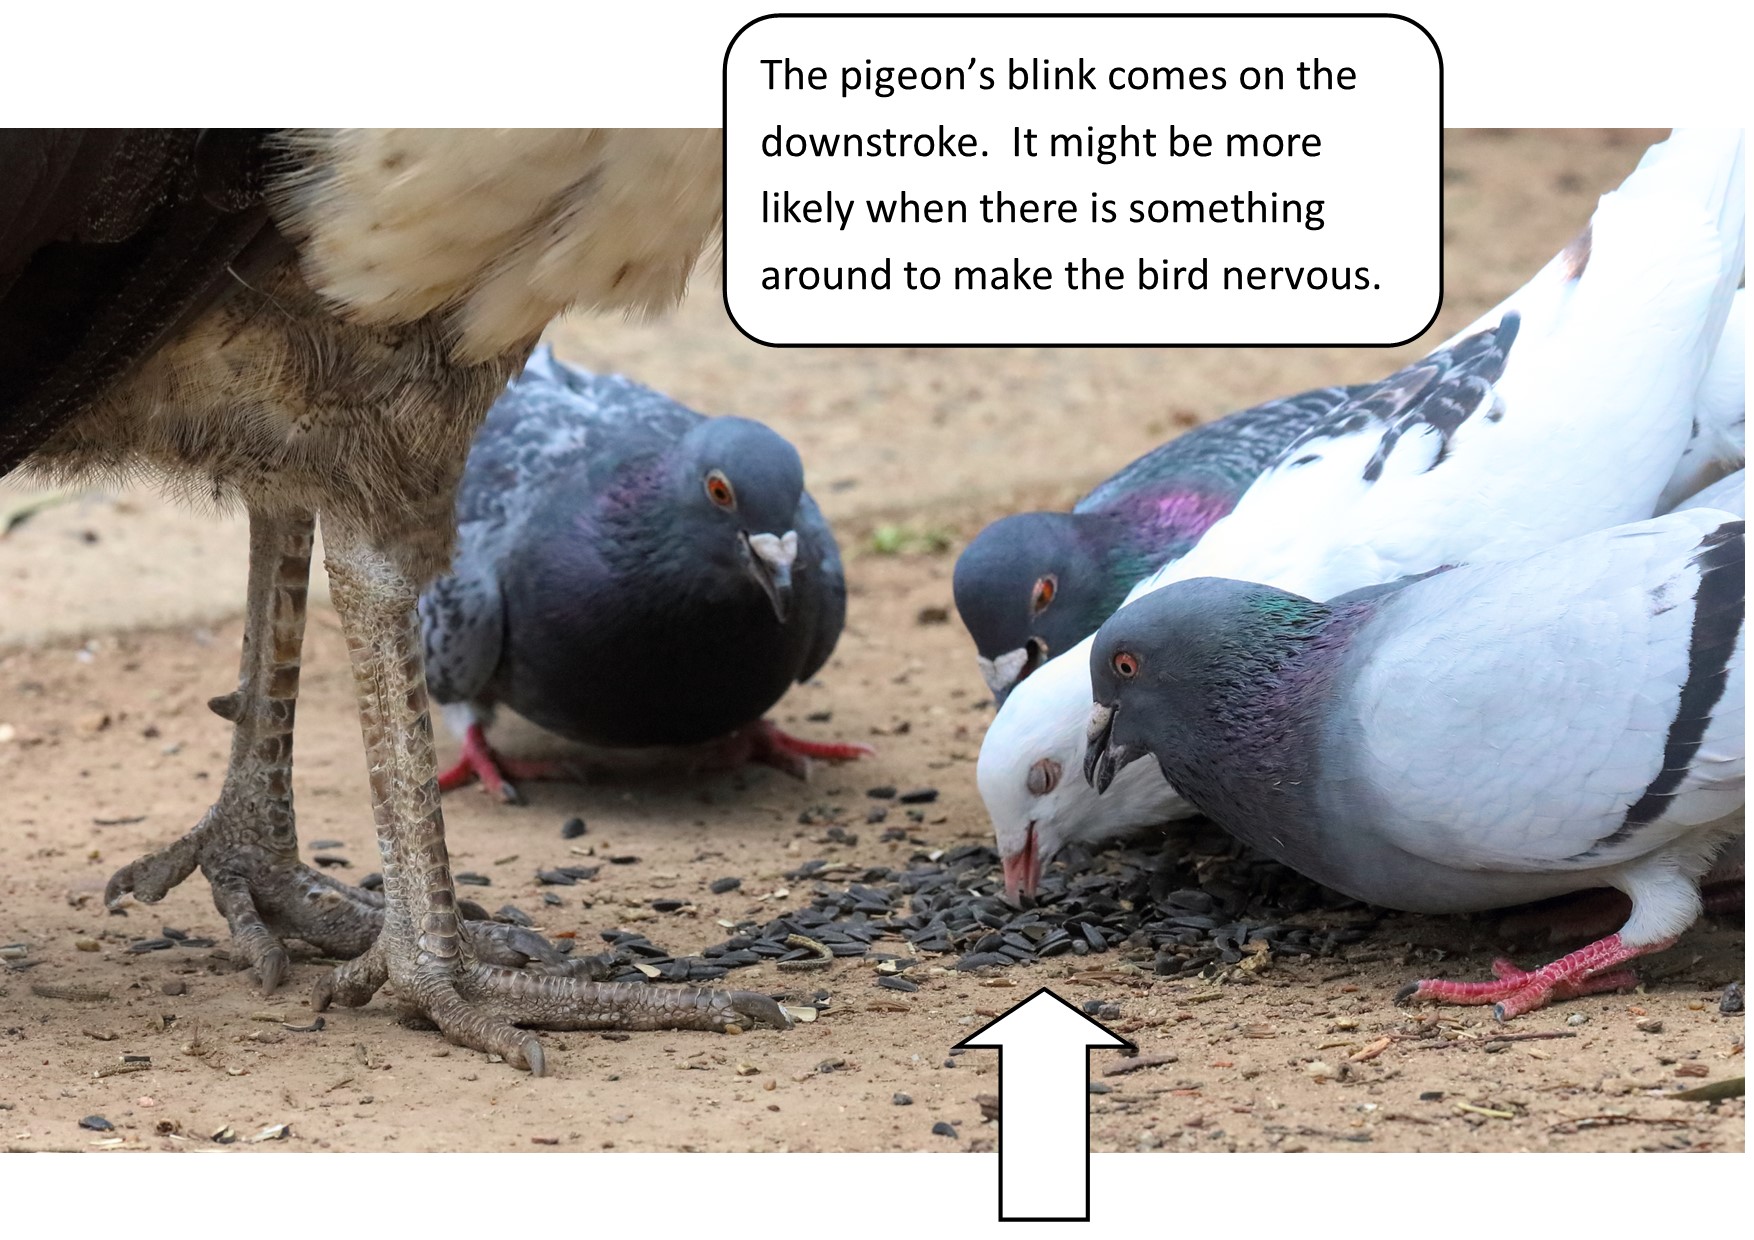 A group of birds eating seeds

Description automatically generated